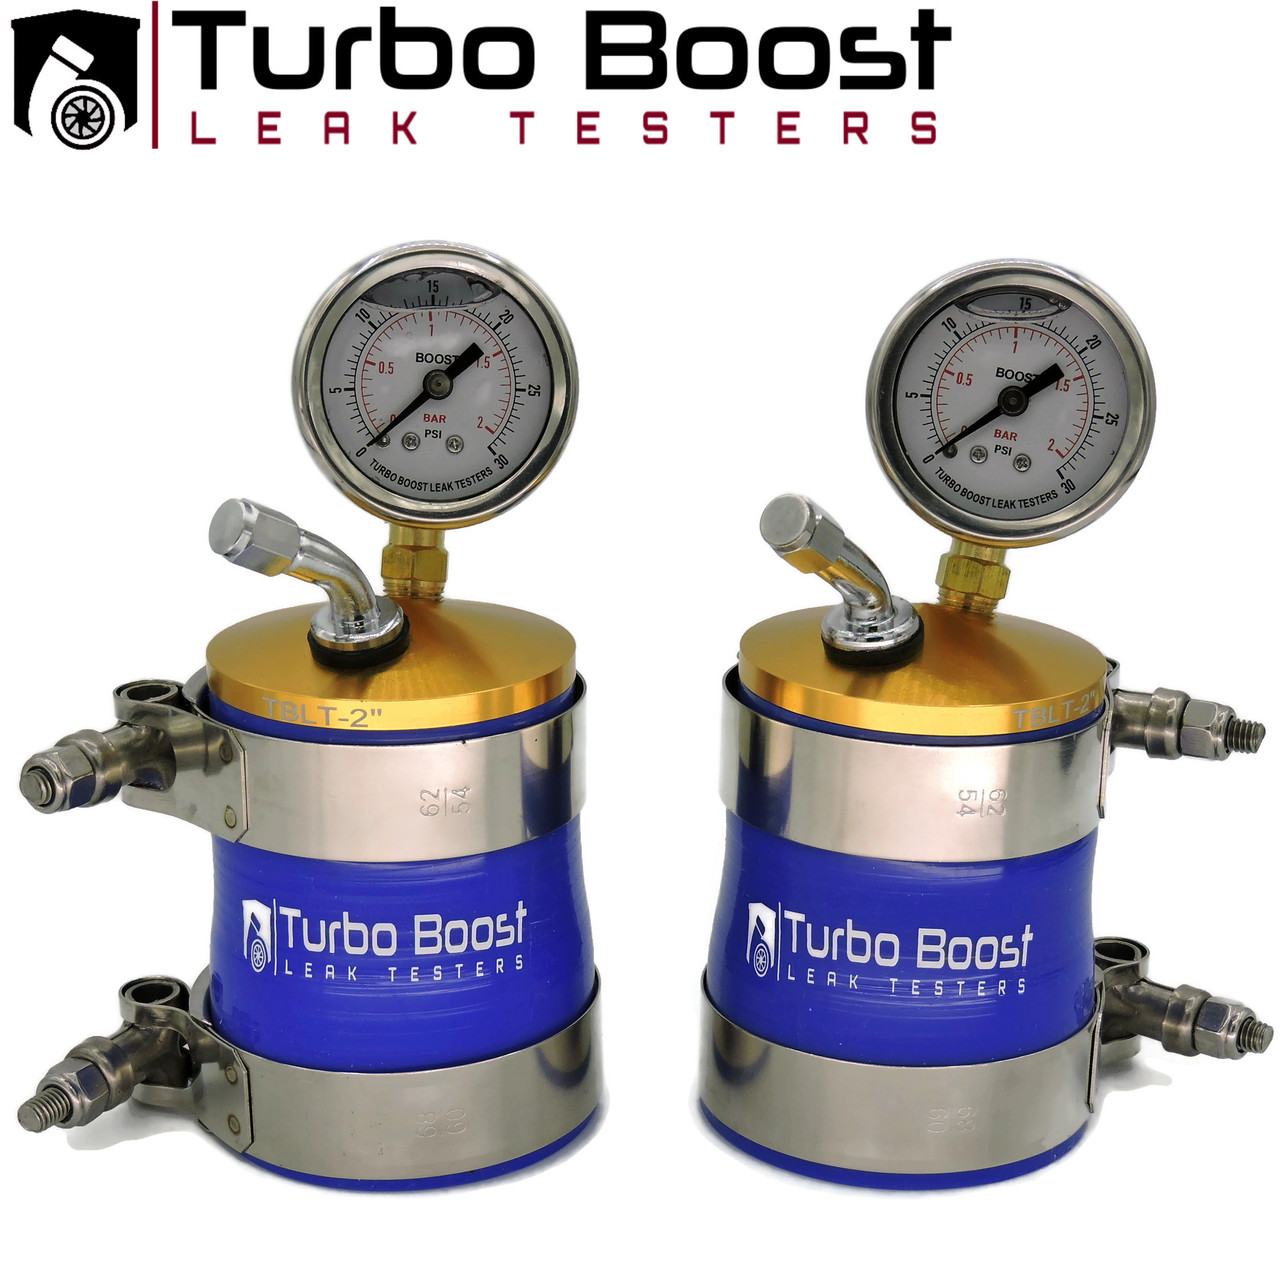 4.0T BOOST LEAK TESTER KIT - TEST UP TO 30 PSI & RESTORE LOST POWER!